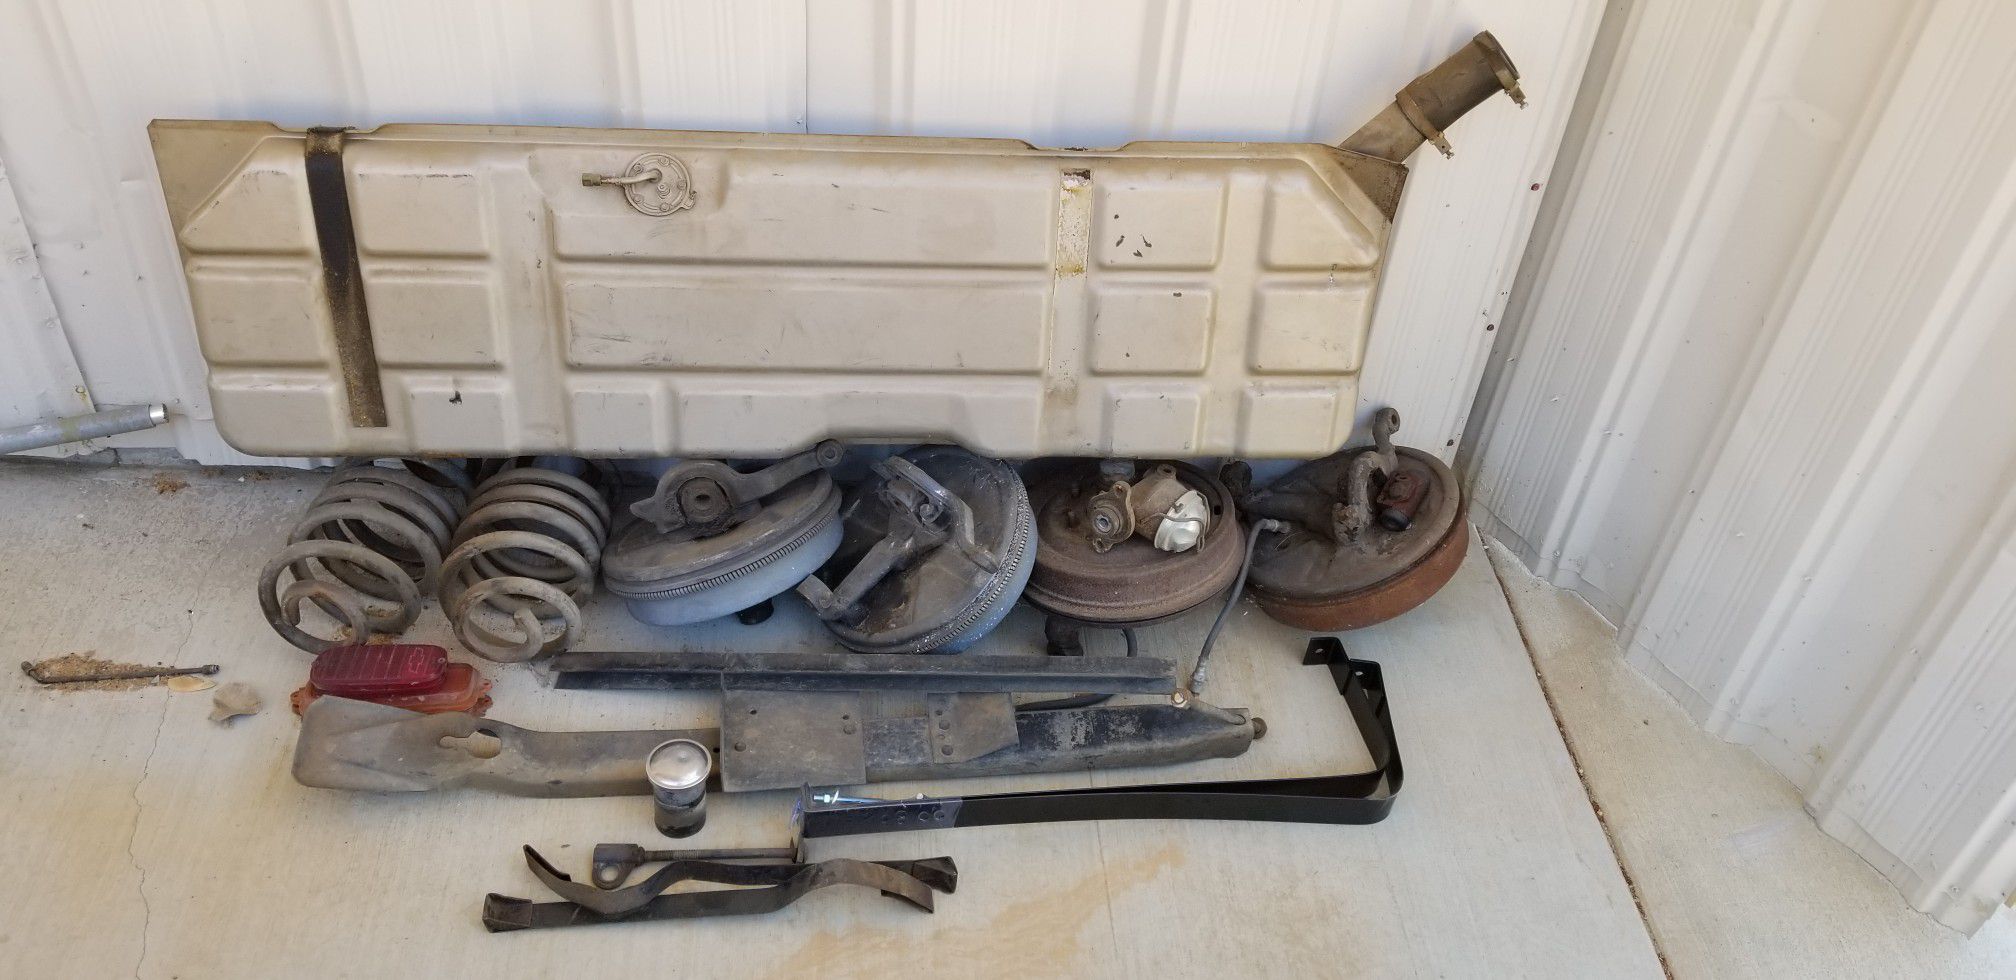 1964 CHEVY C10 TRUCK PARTS